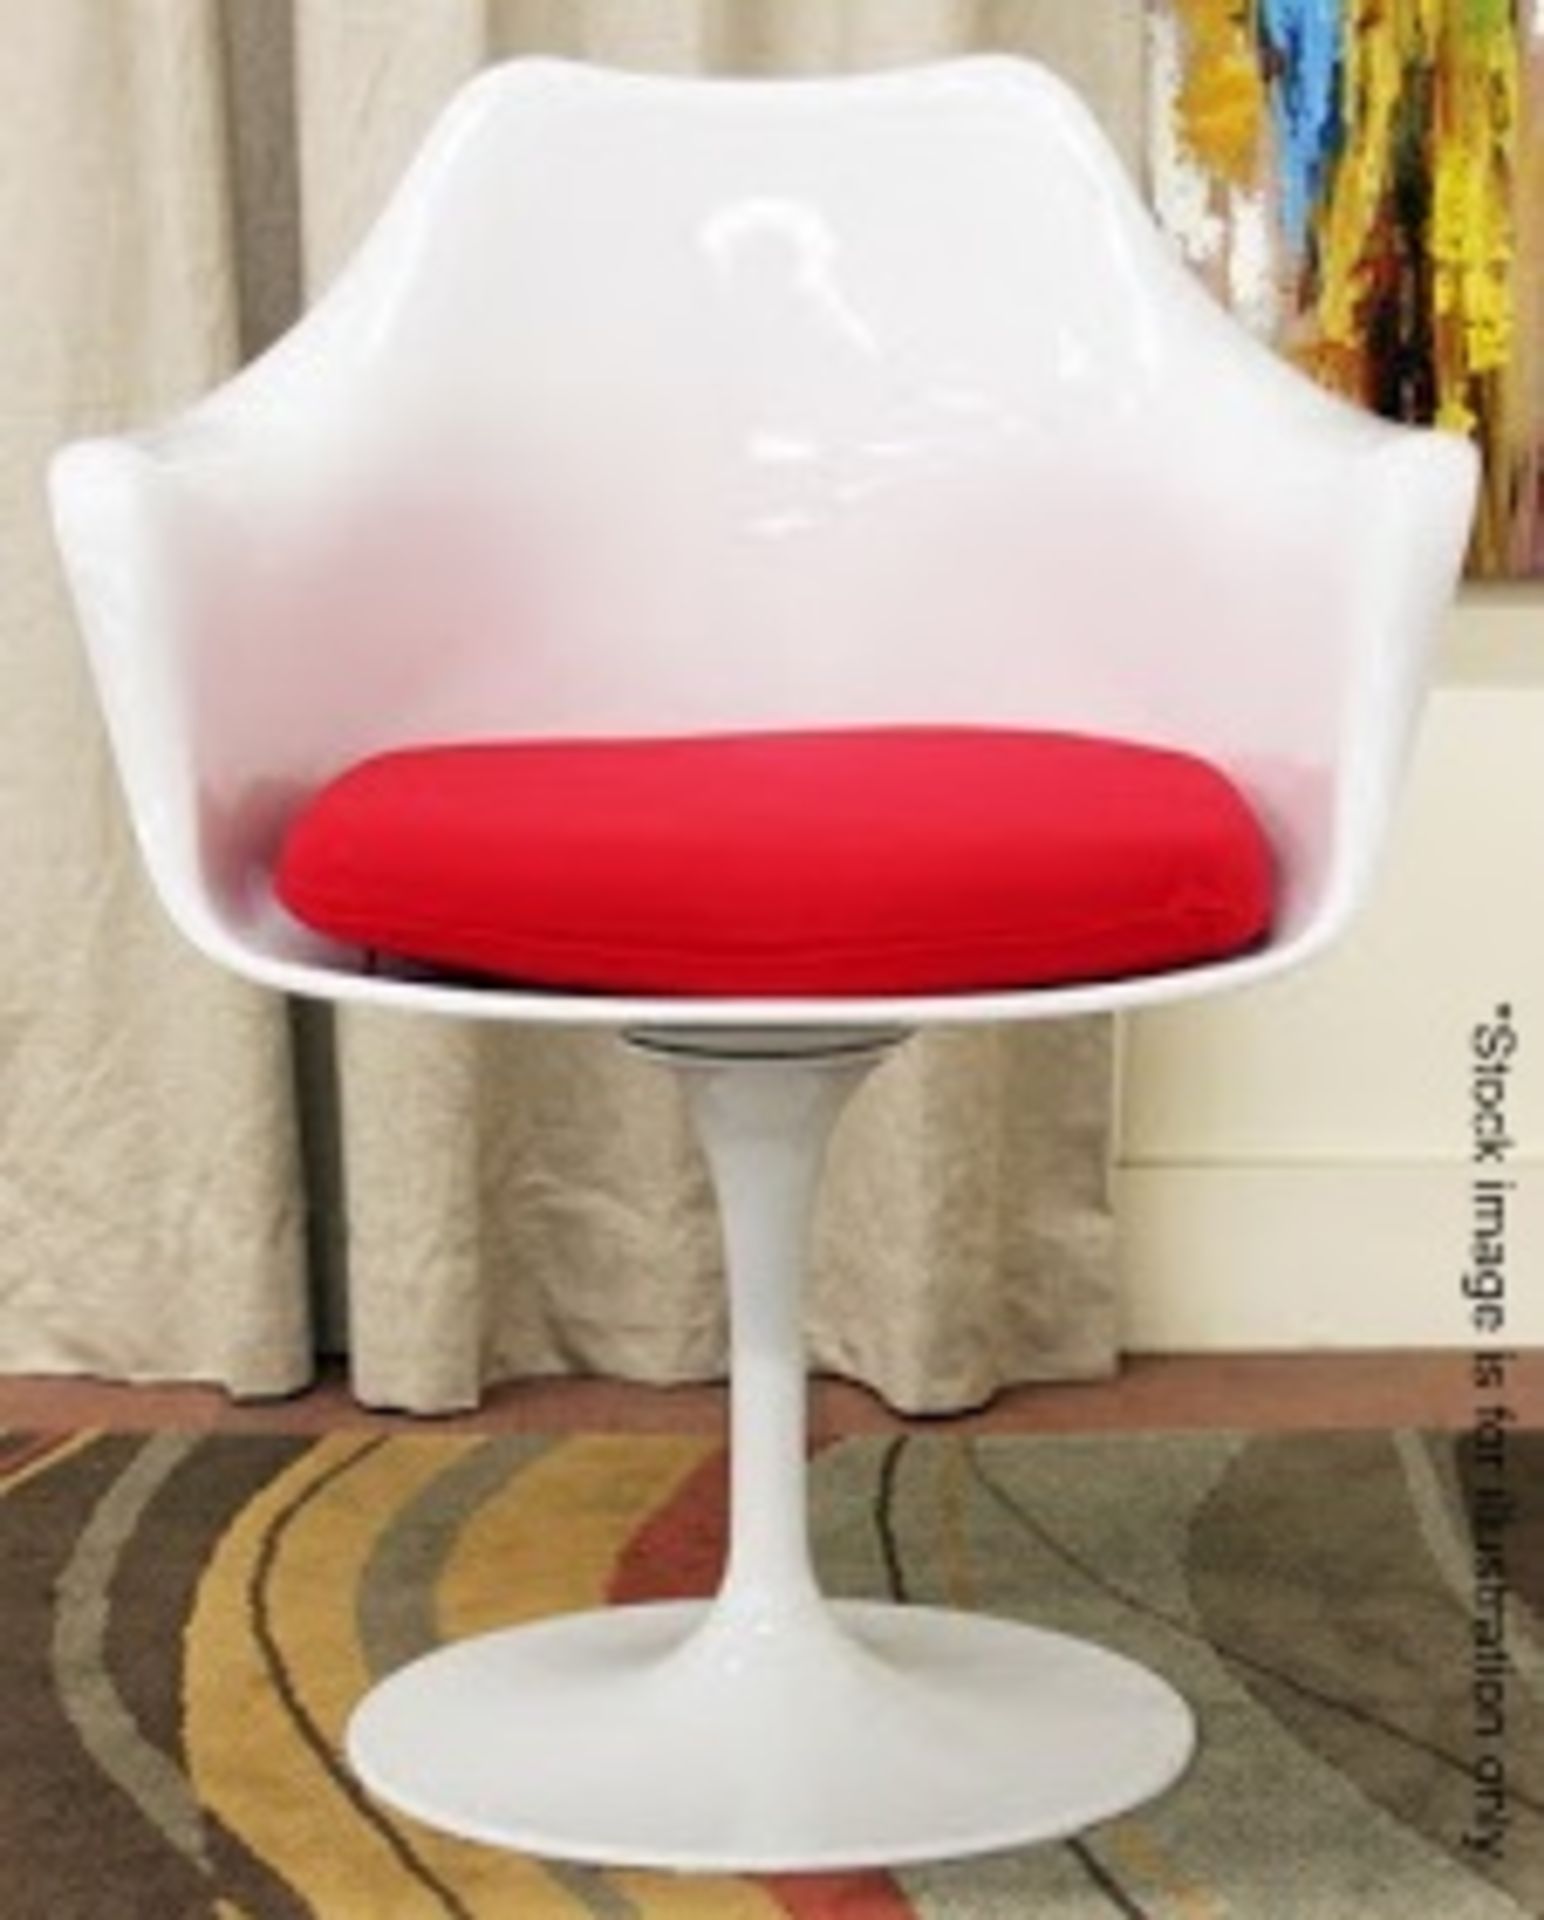 1 x Eero Saarinen Inspired Tulip Armchair In White With Red Fabric Cushion - Brand New Boxed Stock - - Image 3 of 3